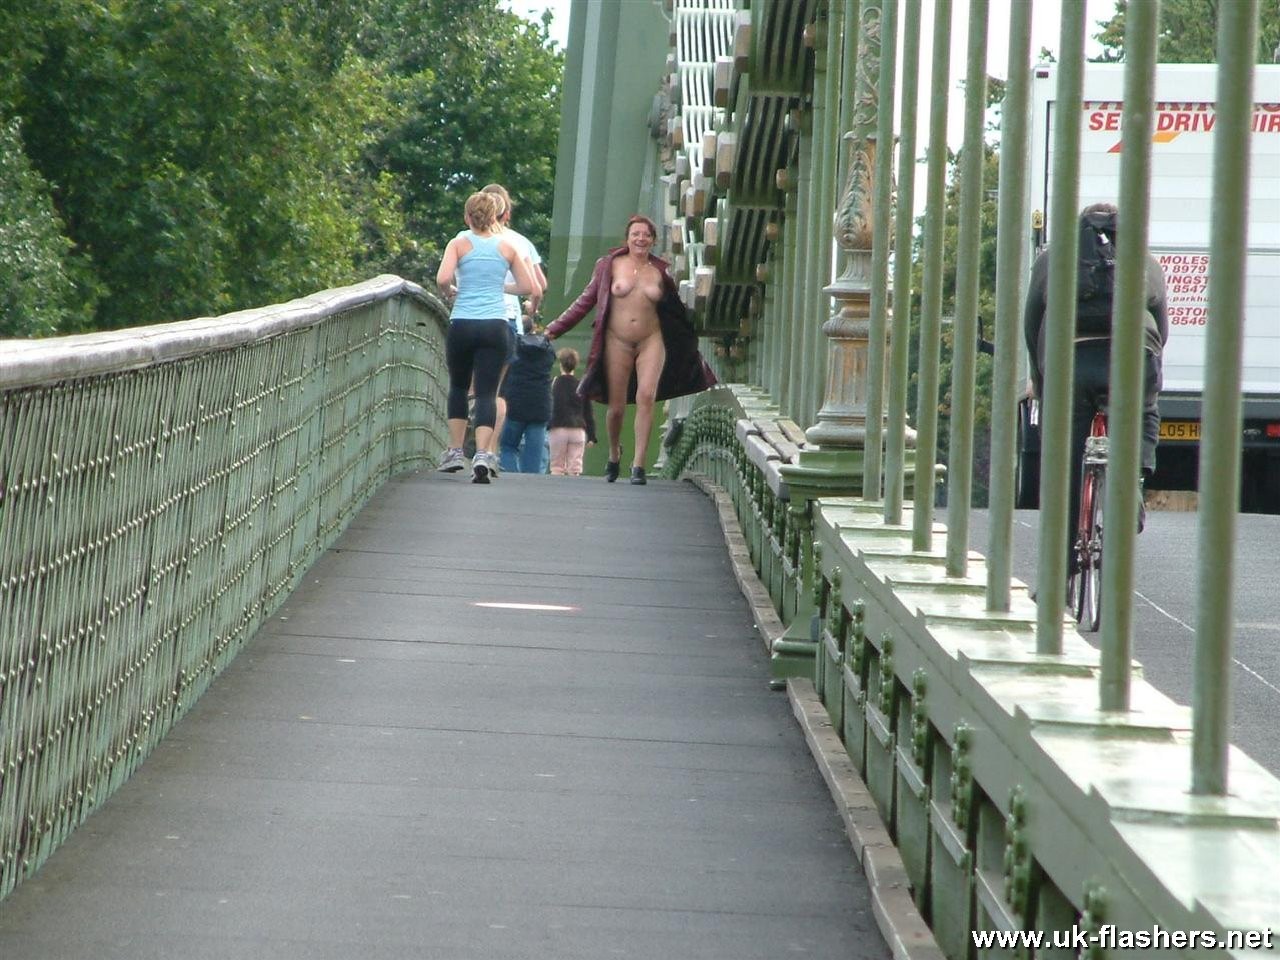 Public exhibitionist flashing and matures outdoor nudity by the Thames #74641148